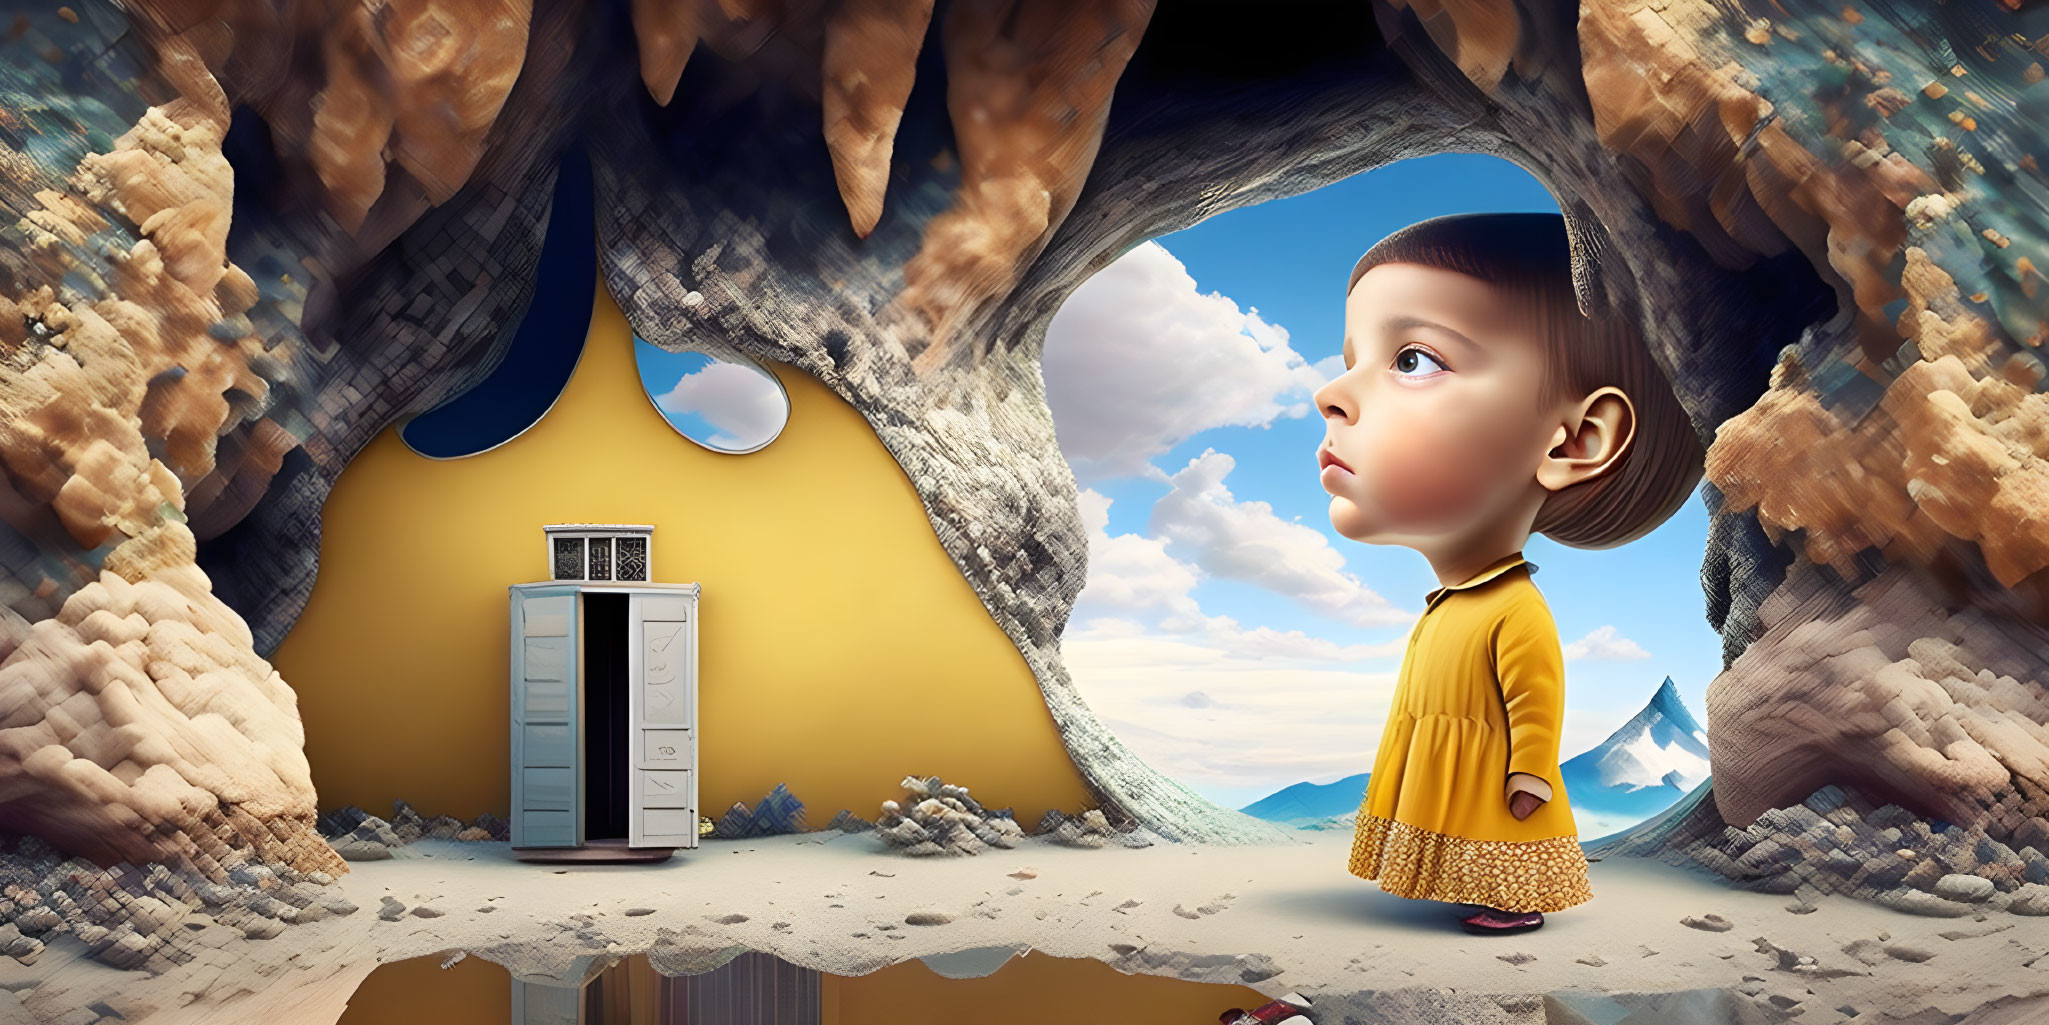 Giant toddler gazes at cave with house and locker in surreal landscape